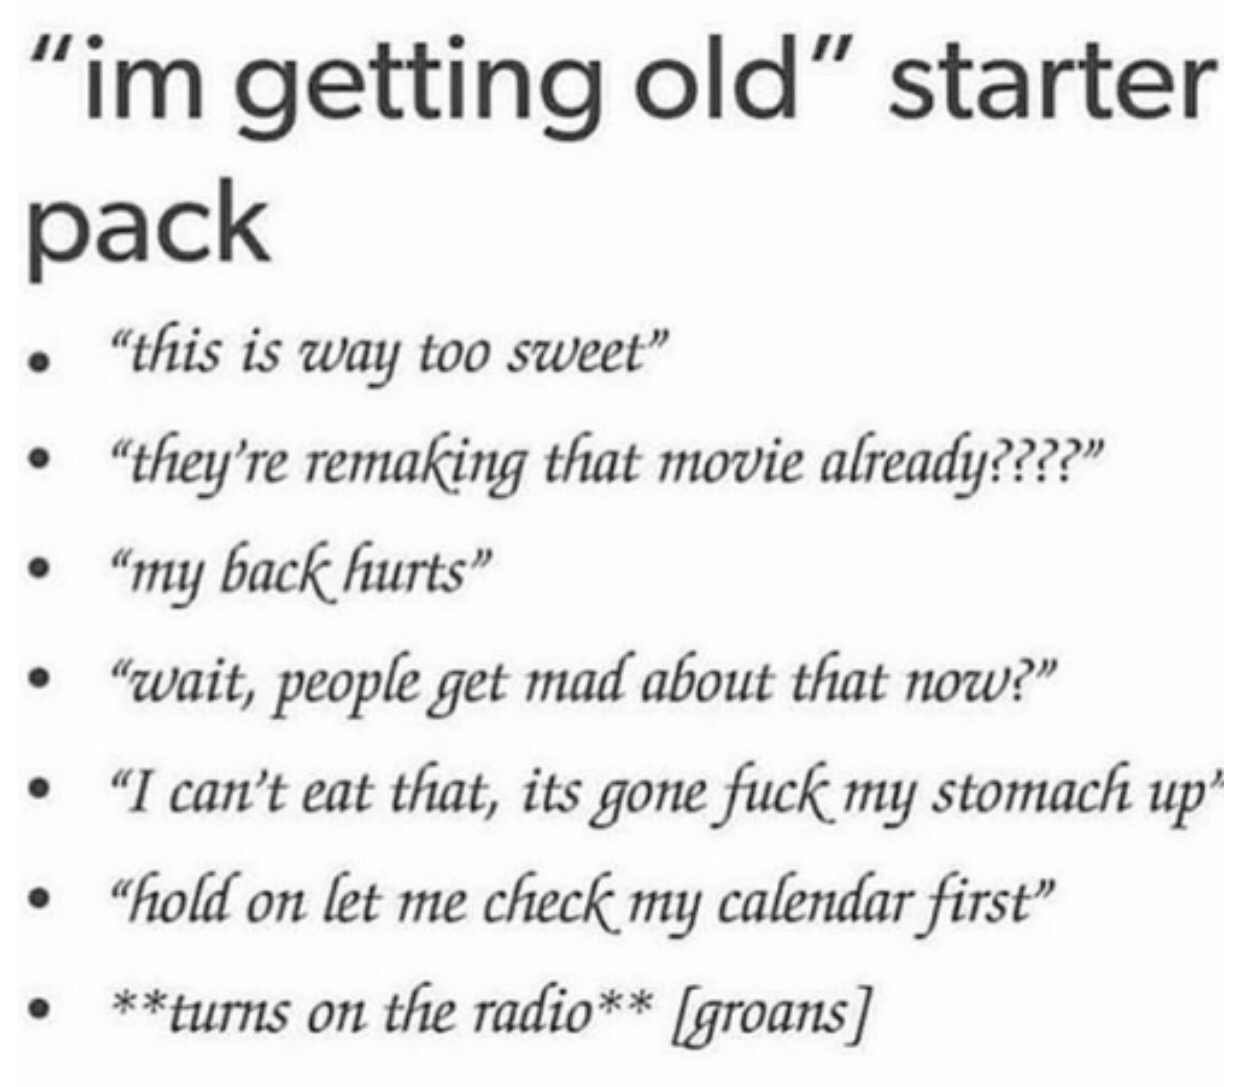 handwriting - "im getting old" starter pack "this is way too sweet "they're remaking that movie already???? my back hurts "wait, people get mad about that now?" I can't eat that, its gone fuck my stomach up' "hold on let me check my calendar first turns o